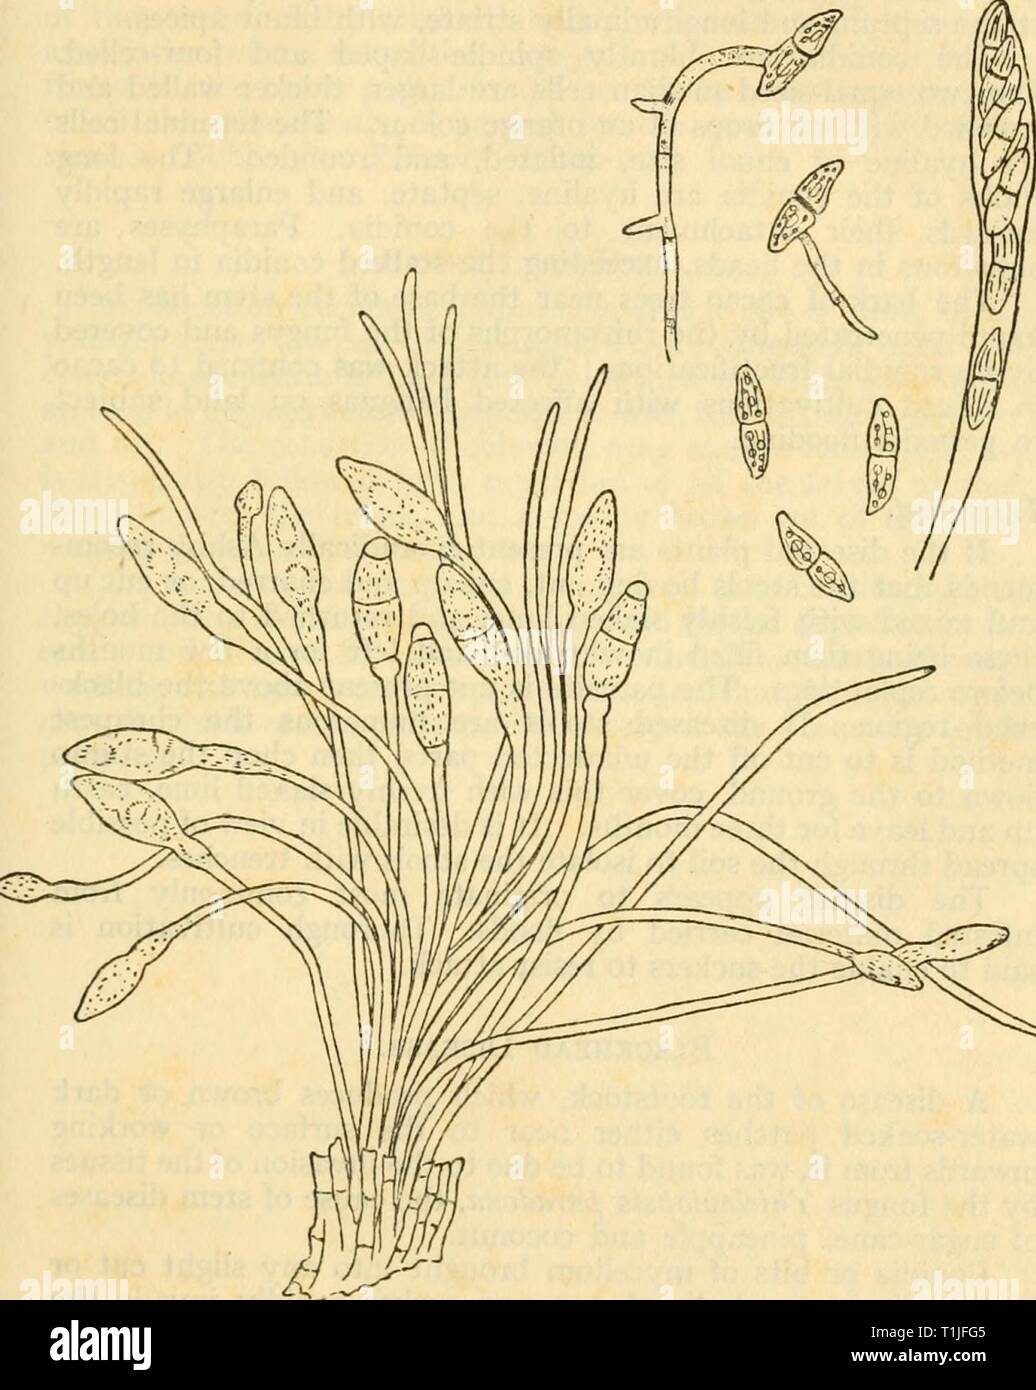 Diseases of crop-plants in the Diseases of crop-plants in the Lesser Antilles  diseasesofcroppl00nowe Year: 1923  DISEASES OF BANANA 253 described as penetrating the tissue of the rootstock, and these in turn give out hyphae which grow among the cells. The fructifications are borne at or just above ground level.    Fig. 98 SpHAEROSTILBE MUSARUM, CONIDIA, ASCUS AND ASCOSPORES Bull. 6, Dept. Agri., Jamaica The conidial stage occurs on small yellow or orange cushions up to 2 mm. diameter, bearing one or more slender white stalks furnished with a brown or brownish red spherical head or ending in a Stock Photo